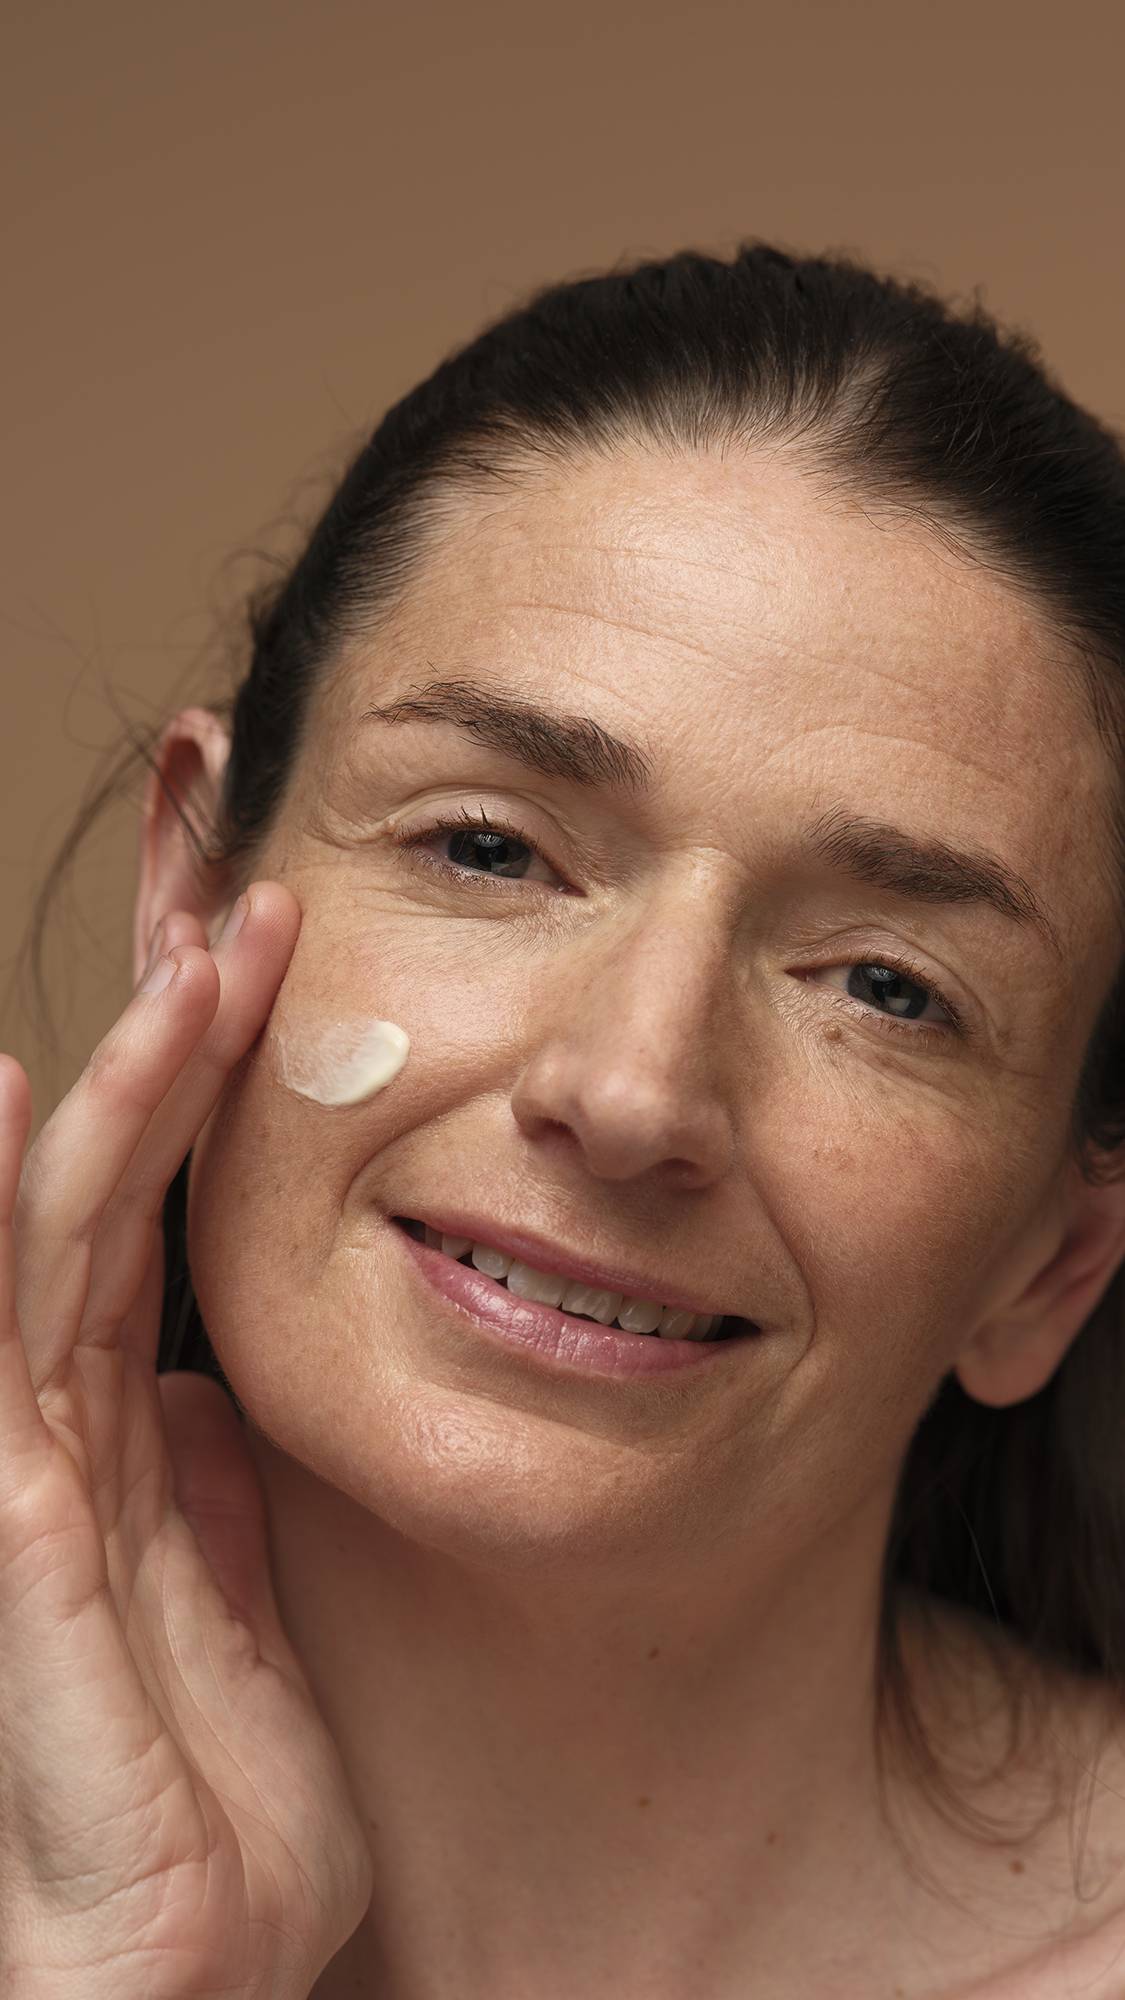 A close-up of the model's face as they gently smooth the Skin's Shangri La self-preserving moisturiser over one of their cheeks. They are on a warm, earthy-brown background.